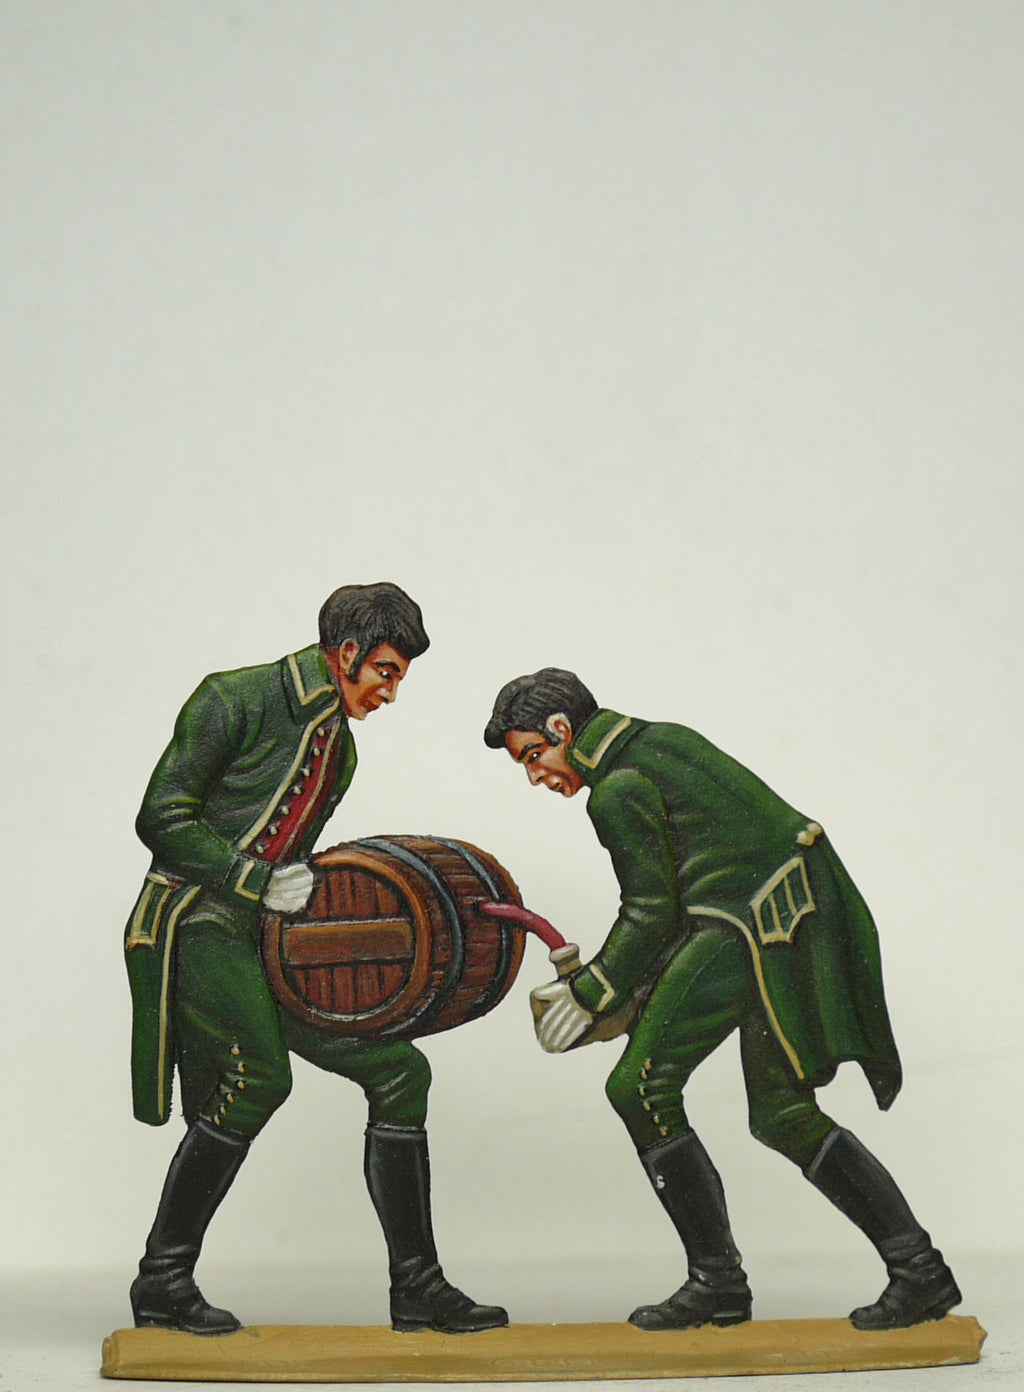 Valets filling wine flask from barrel - Glorious Empires-Historical Miniatures  